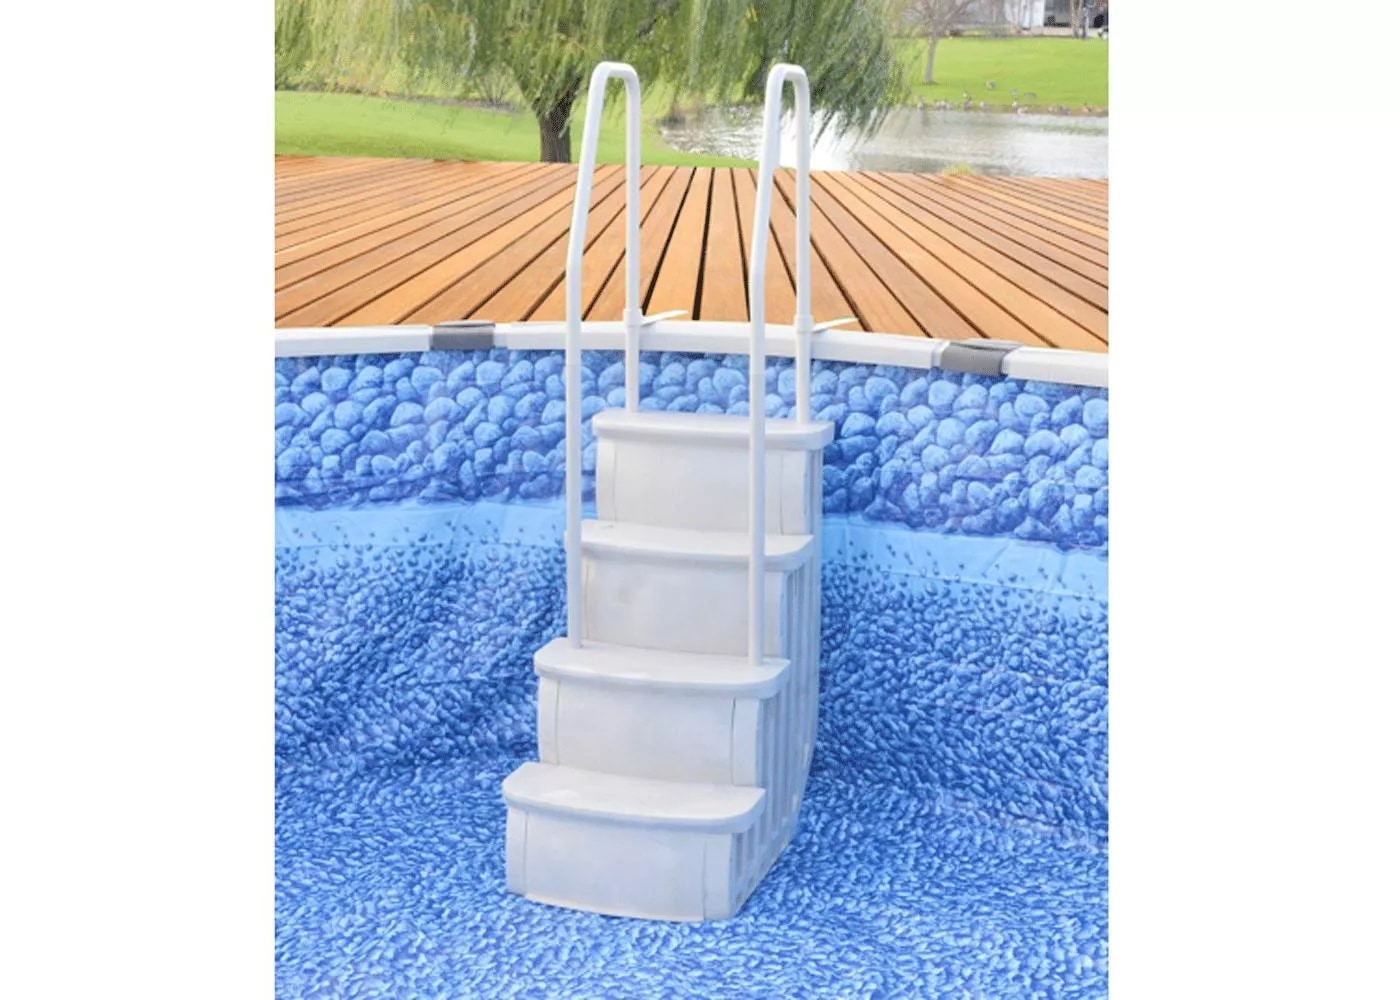 Main Access 200601T iStep Above Ground Swimming Pool Deck Entry Steps Ladder New